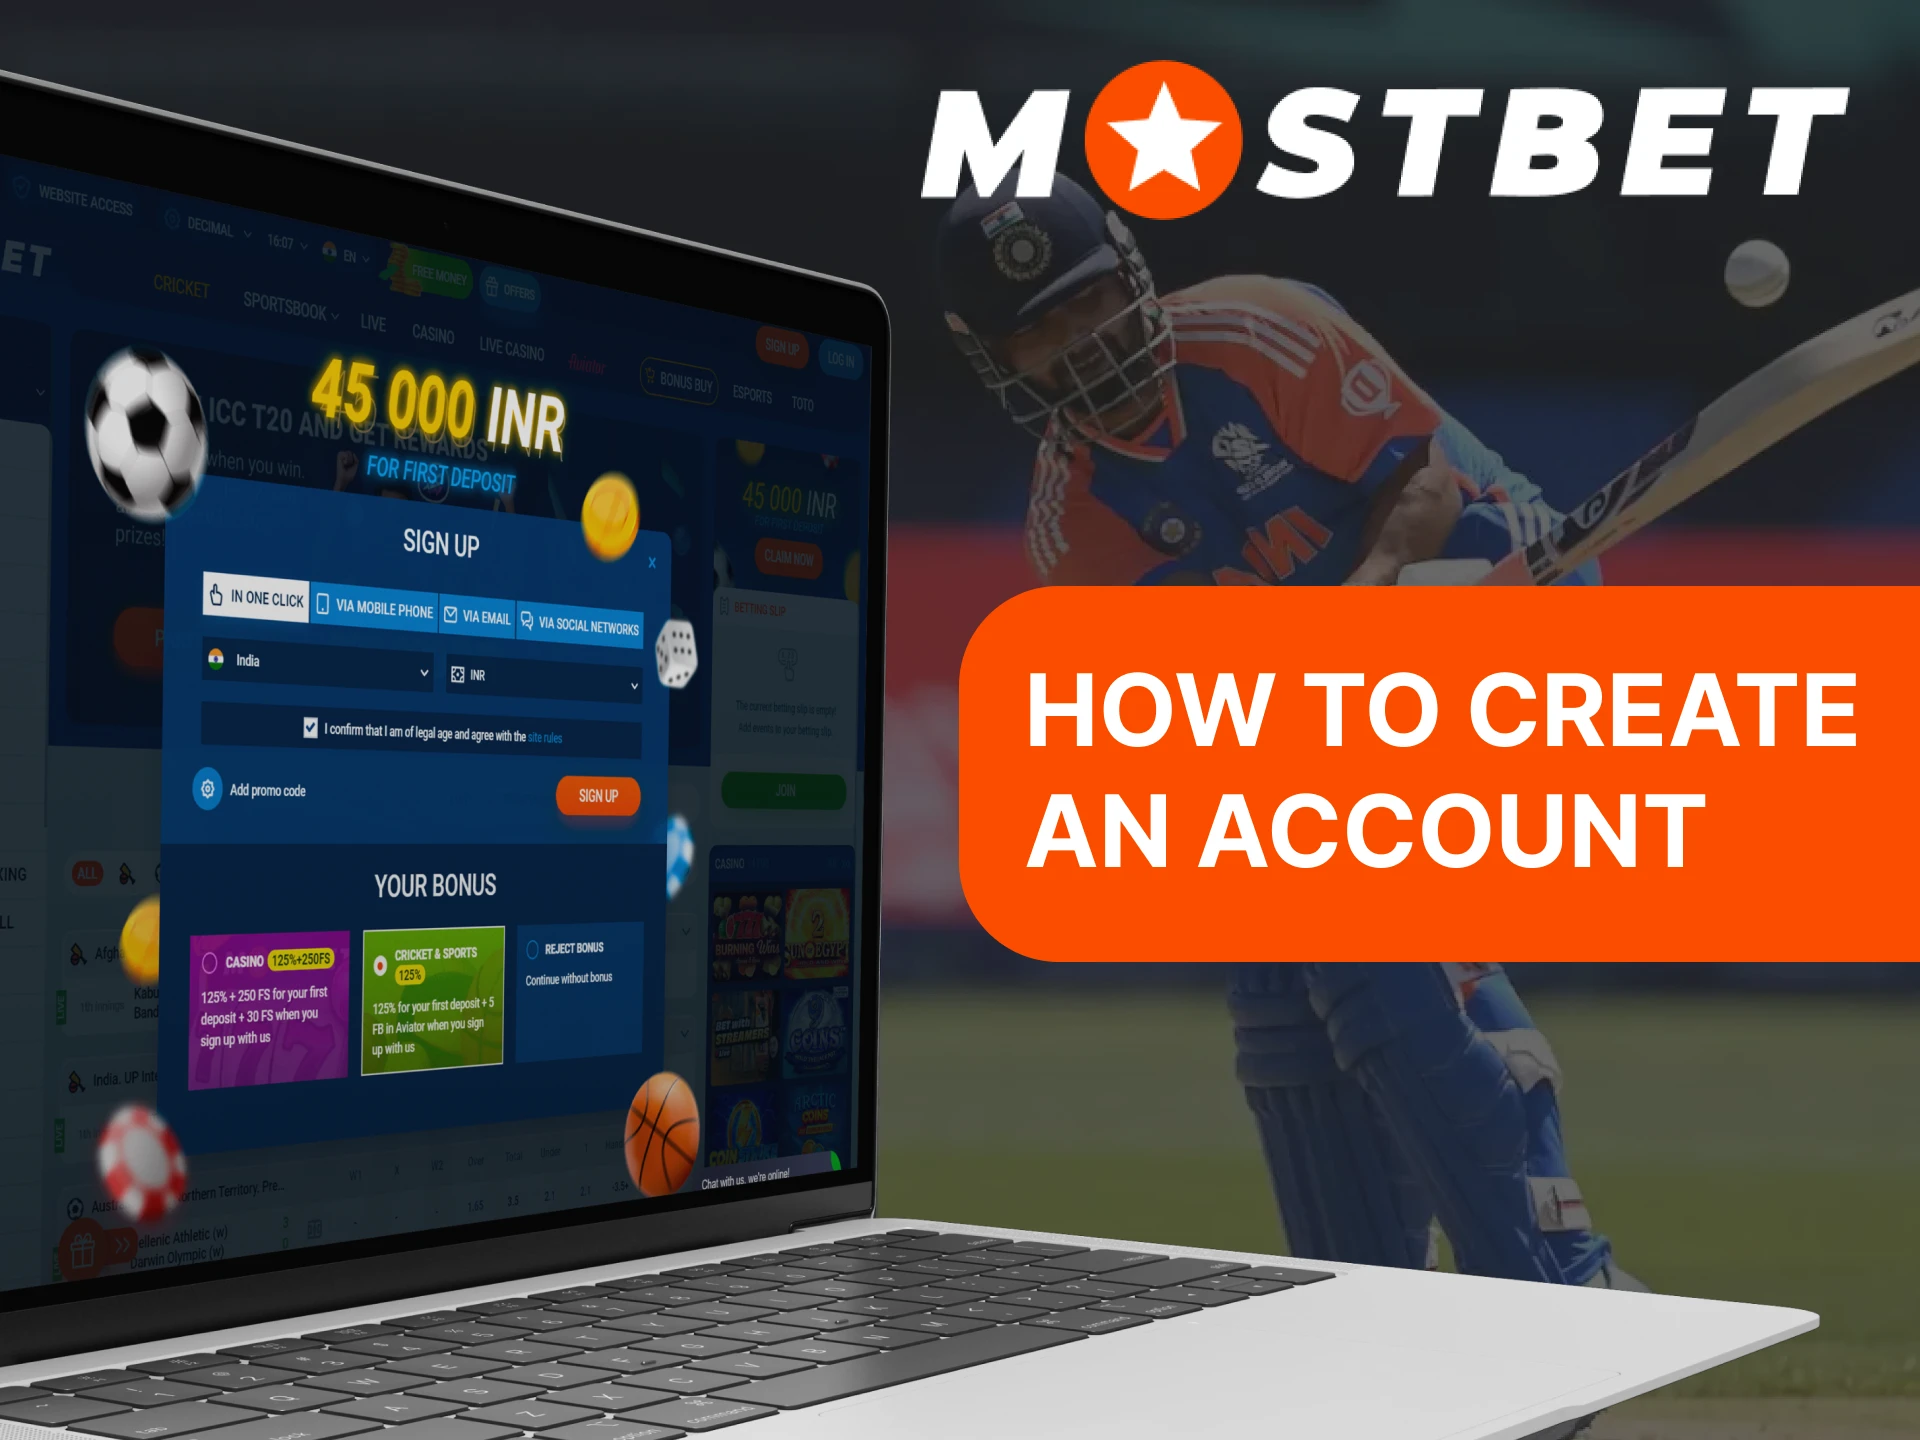 Follow these steps to create a Mostbet account.